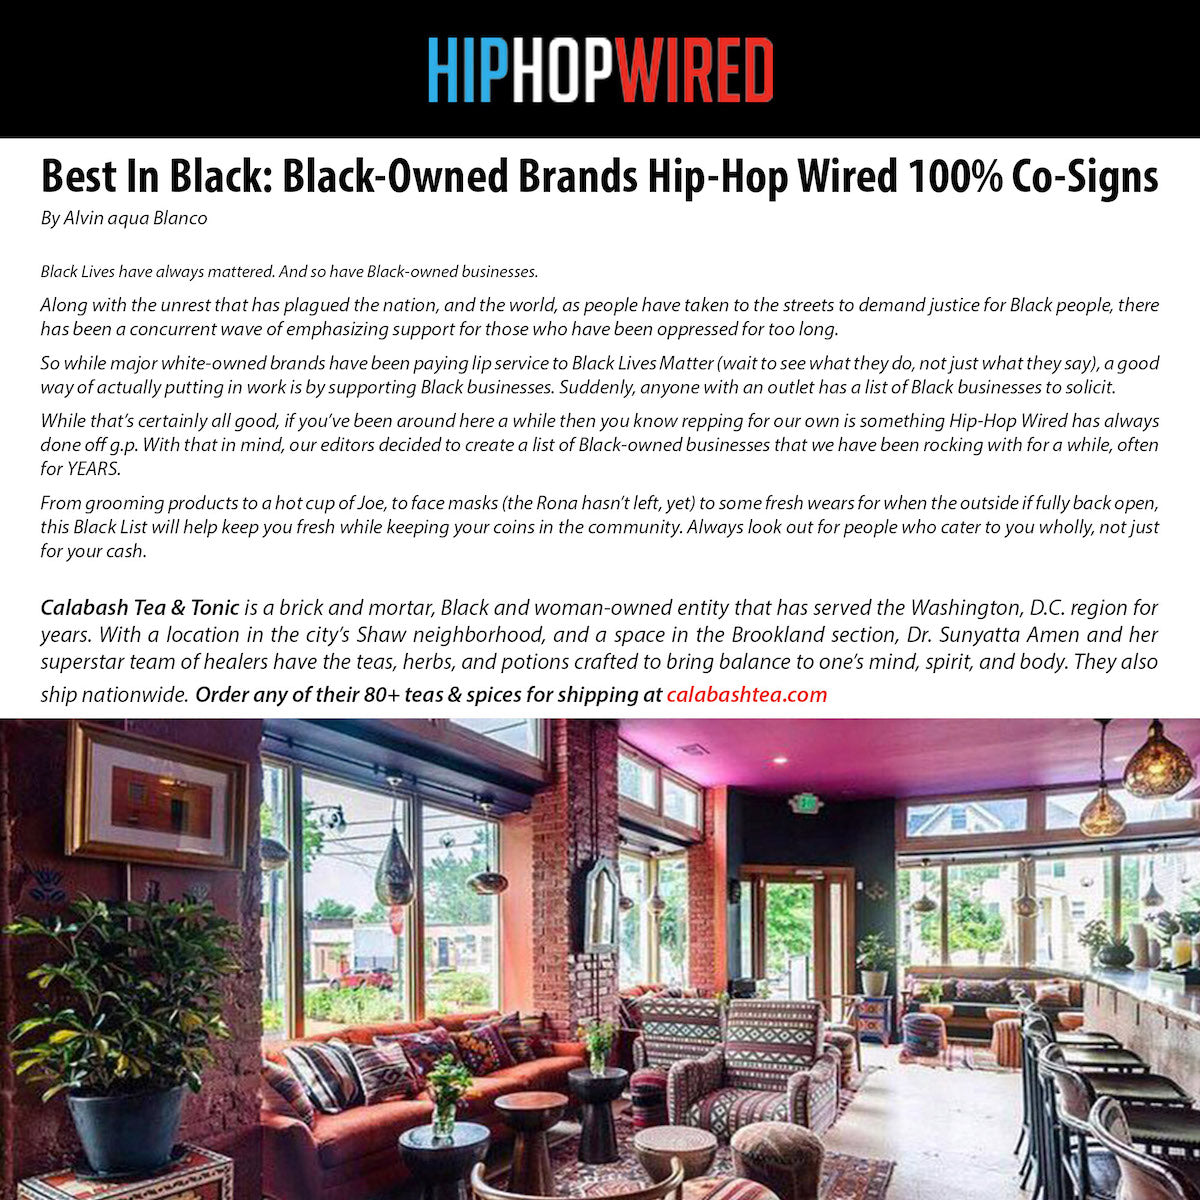 HIPHOP WIRED - Best in Black-Owned Brands Hip-Hop Wired 100% Co-Signs